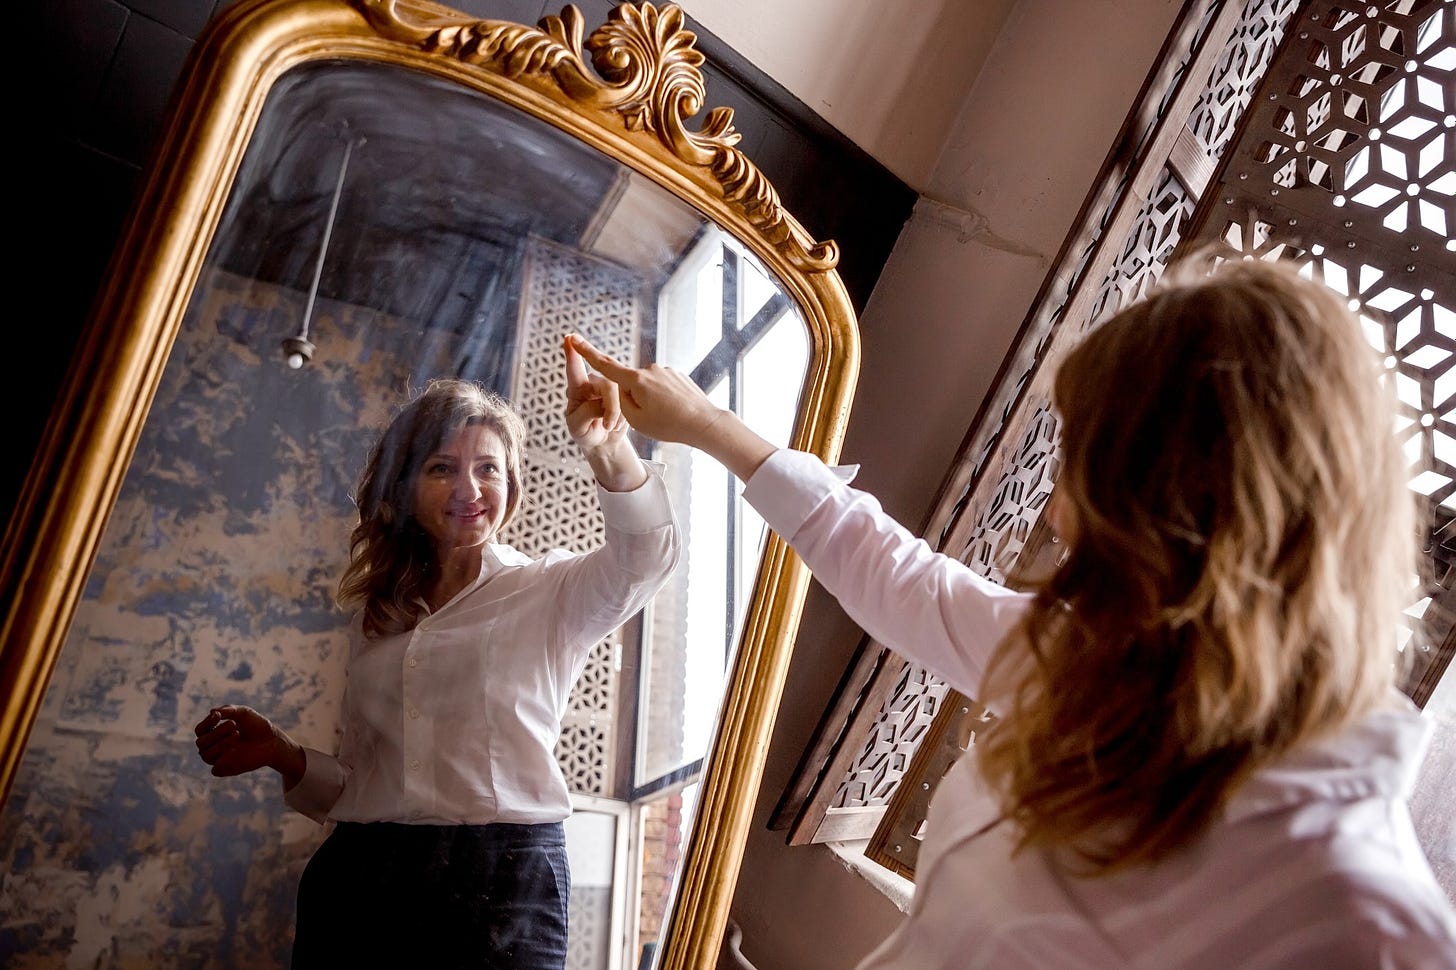 A woman smiles as she traces her reflection in a mirror.